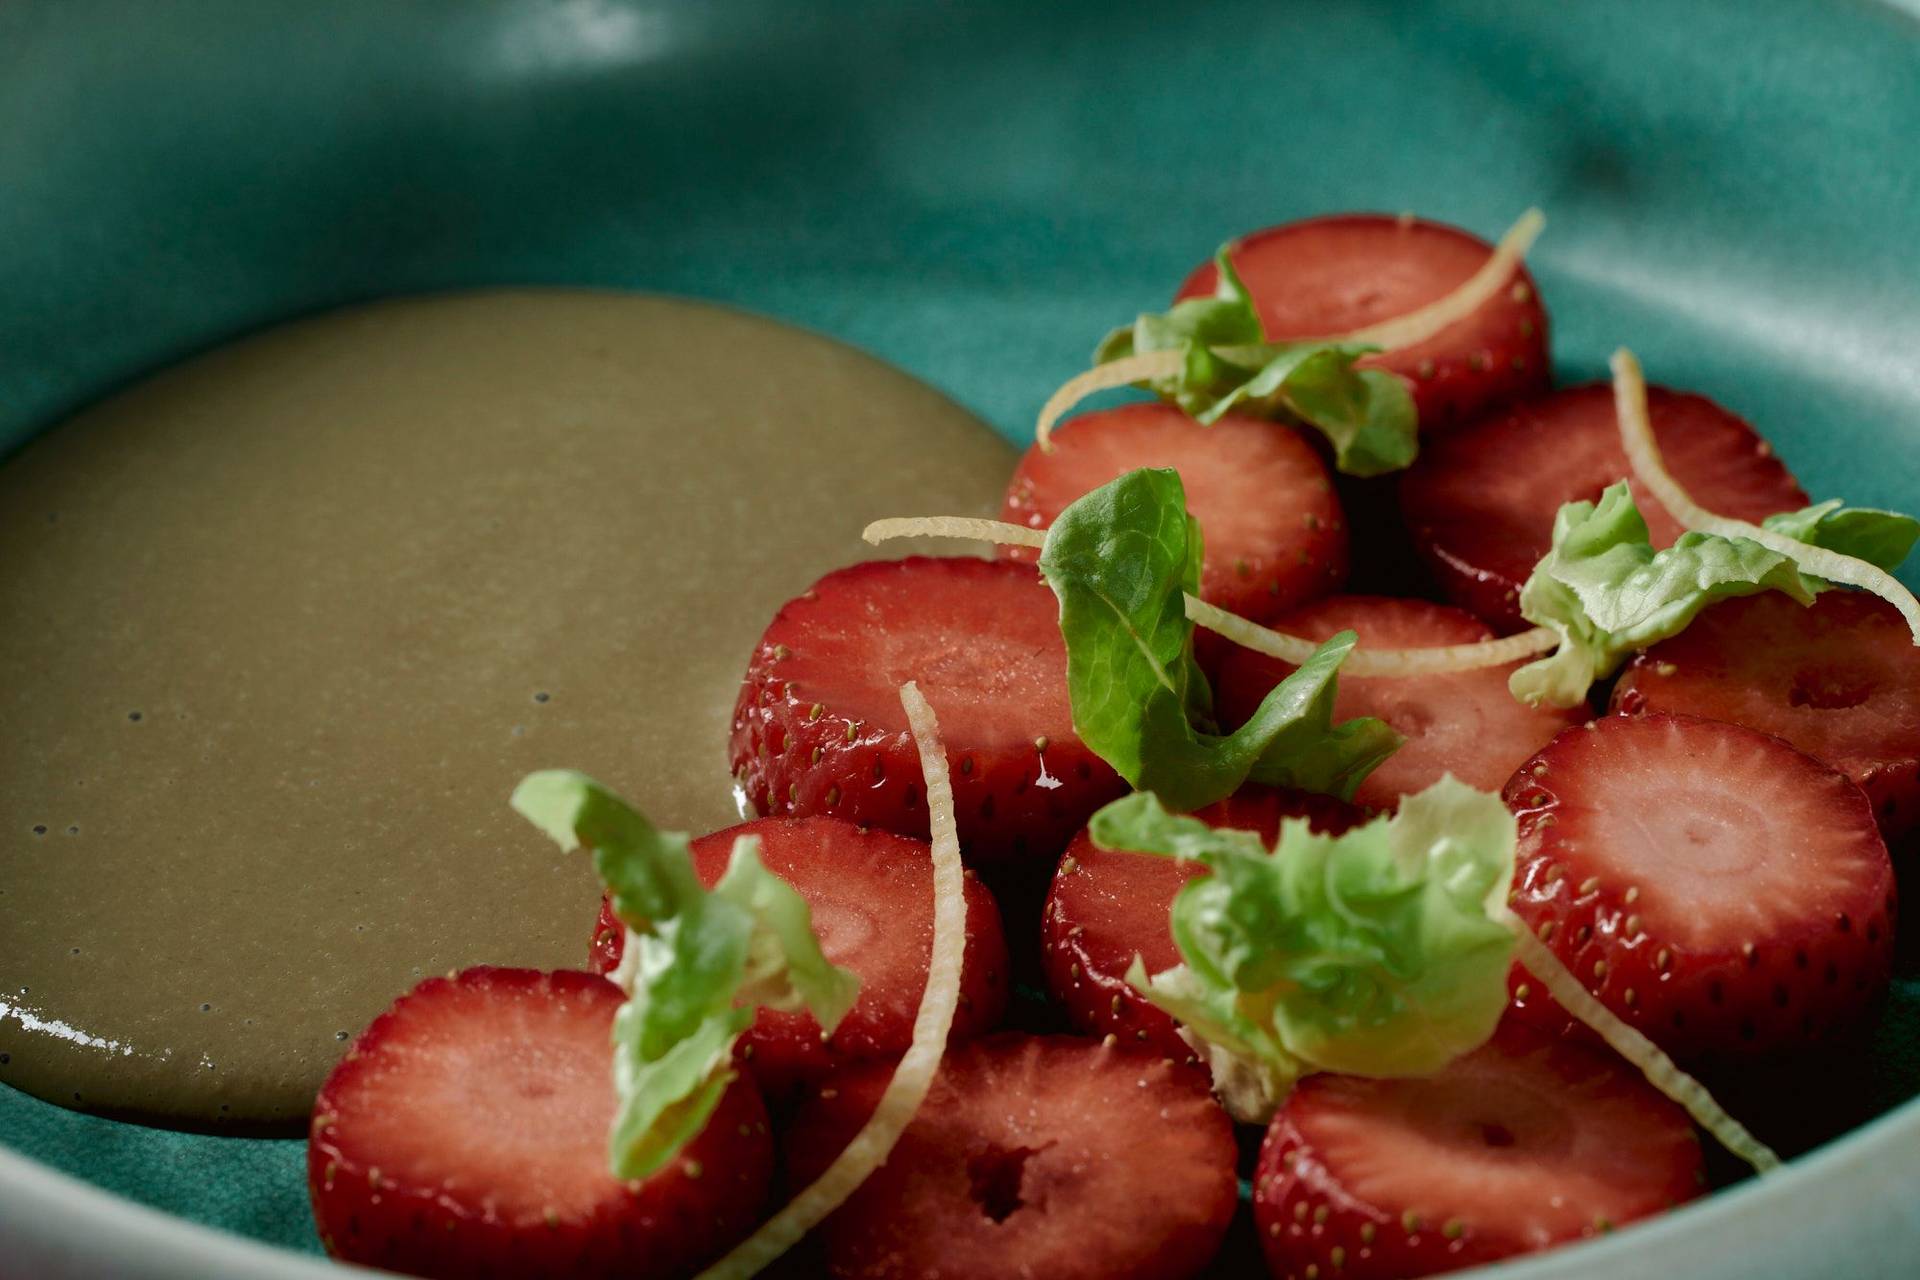 vegan strawberry dessert with lettuce and sunflower seeds on a turquoise plate 